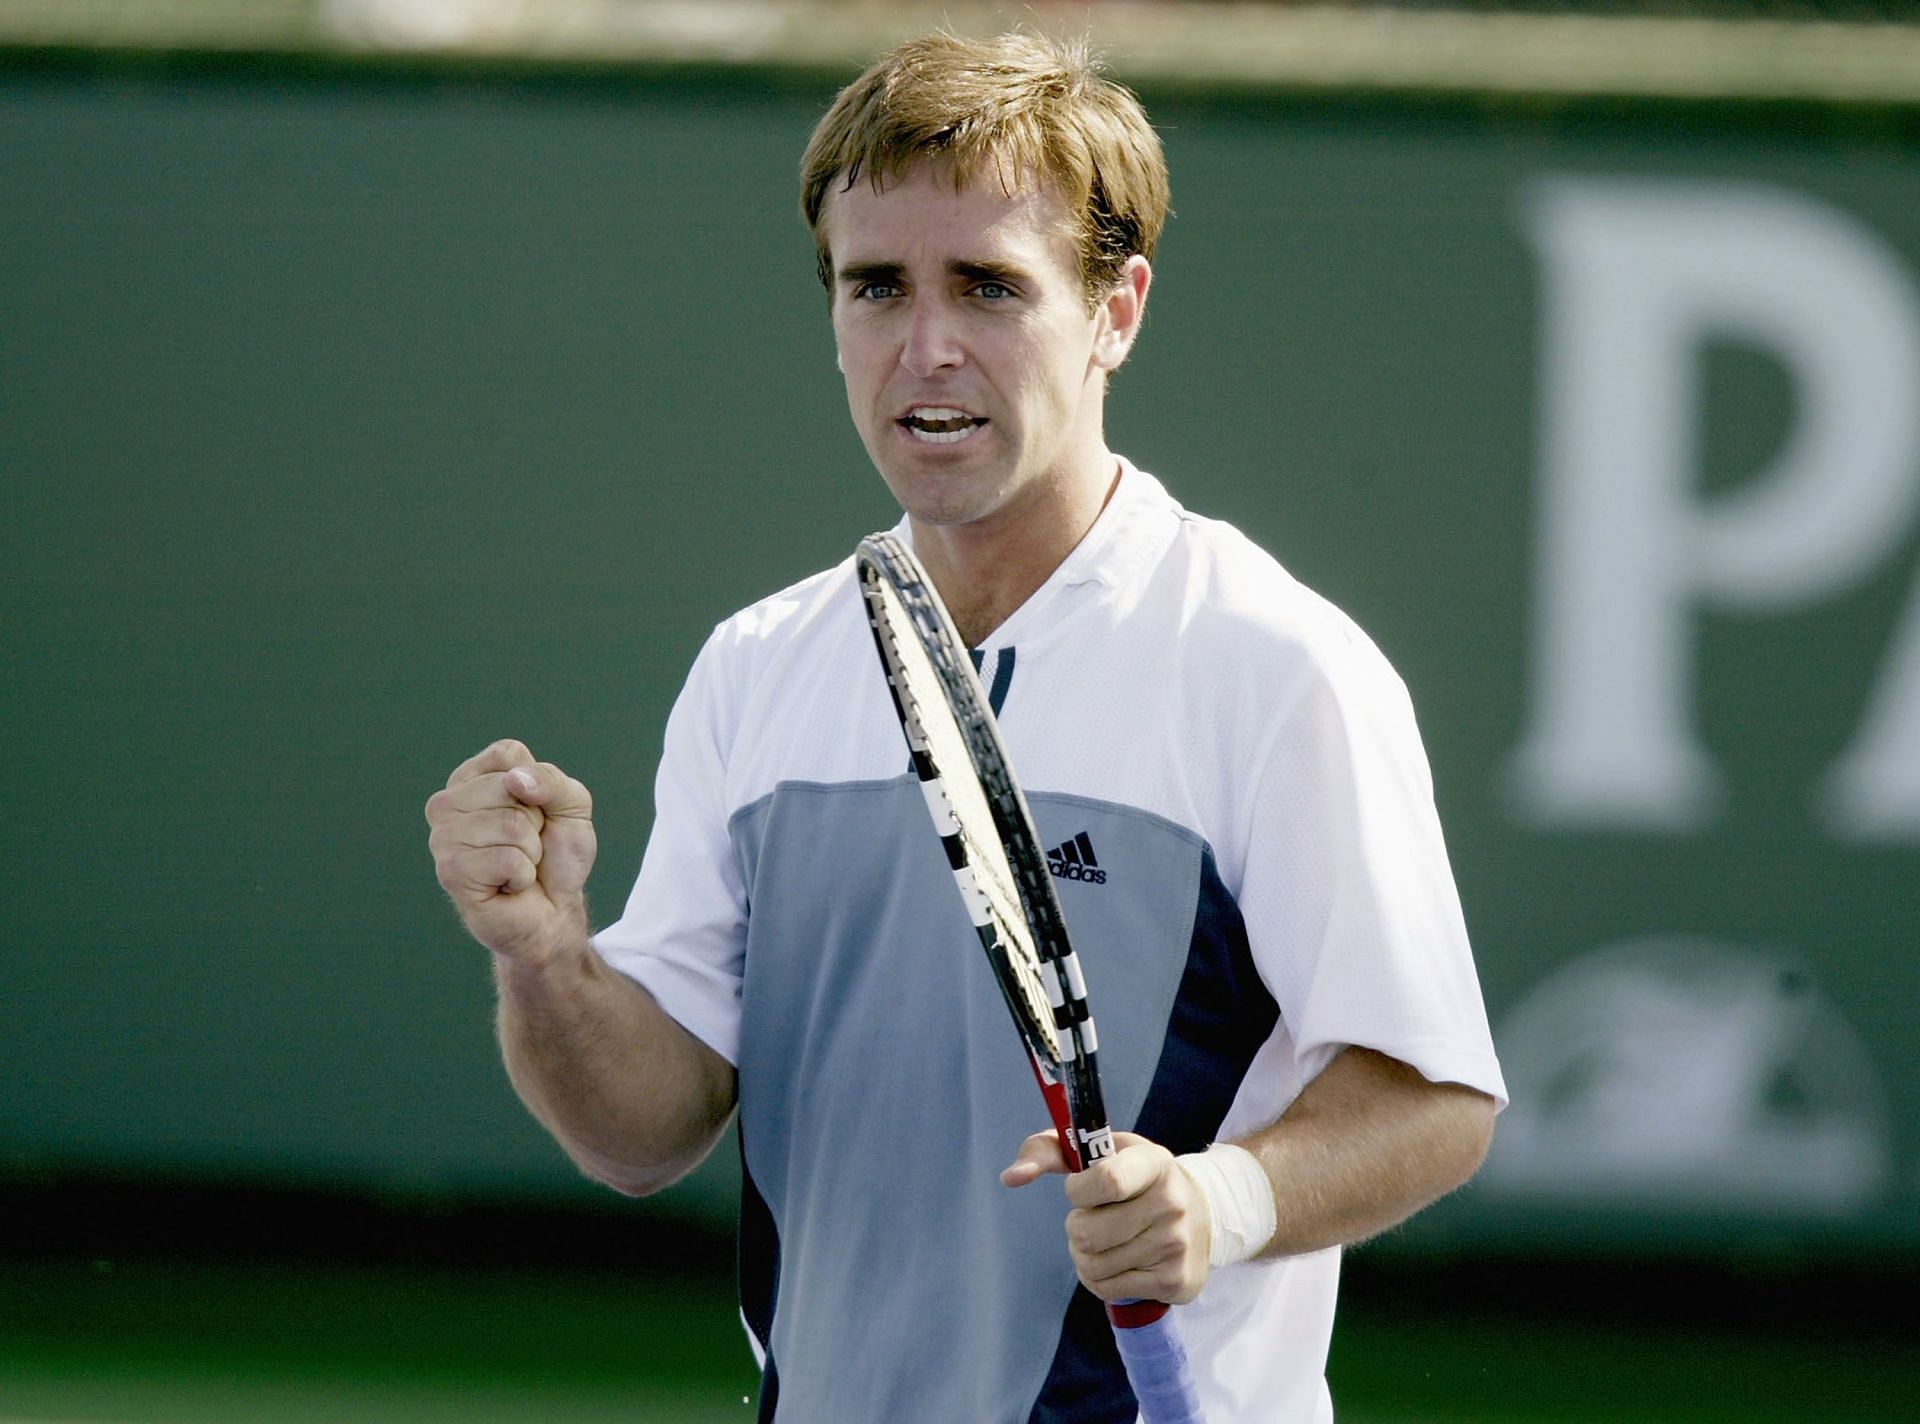 Brian Vahaly at the Indian Wells Tennis Garden in Indian Wells, California in March 2004